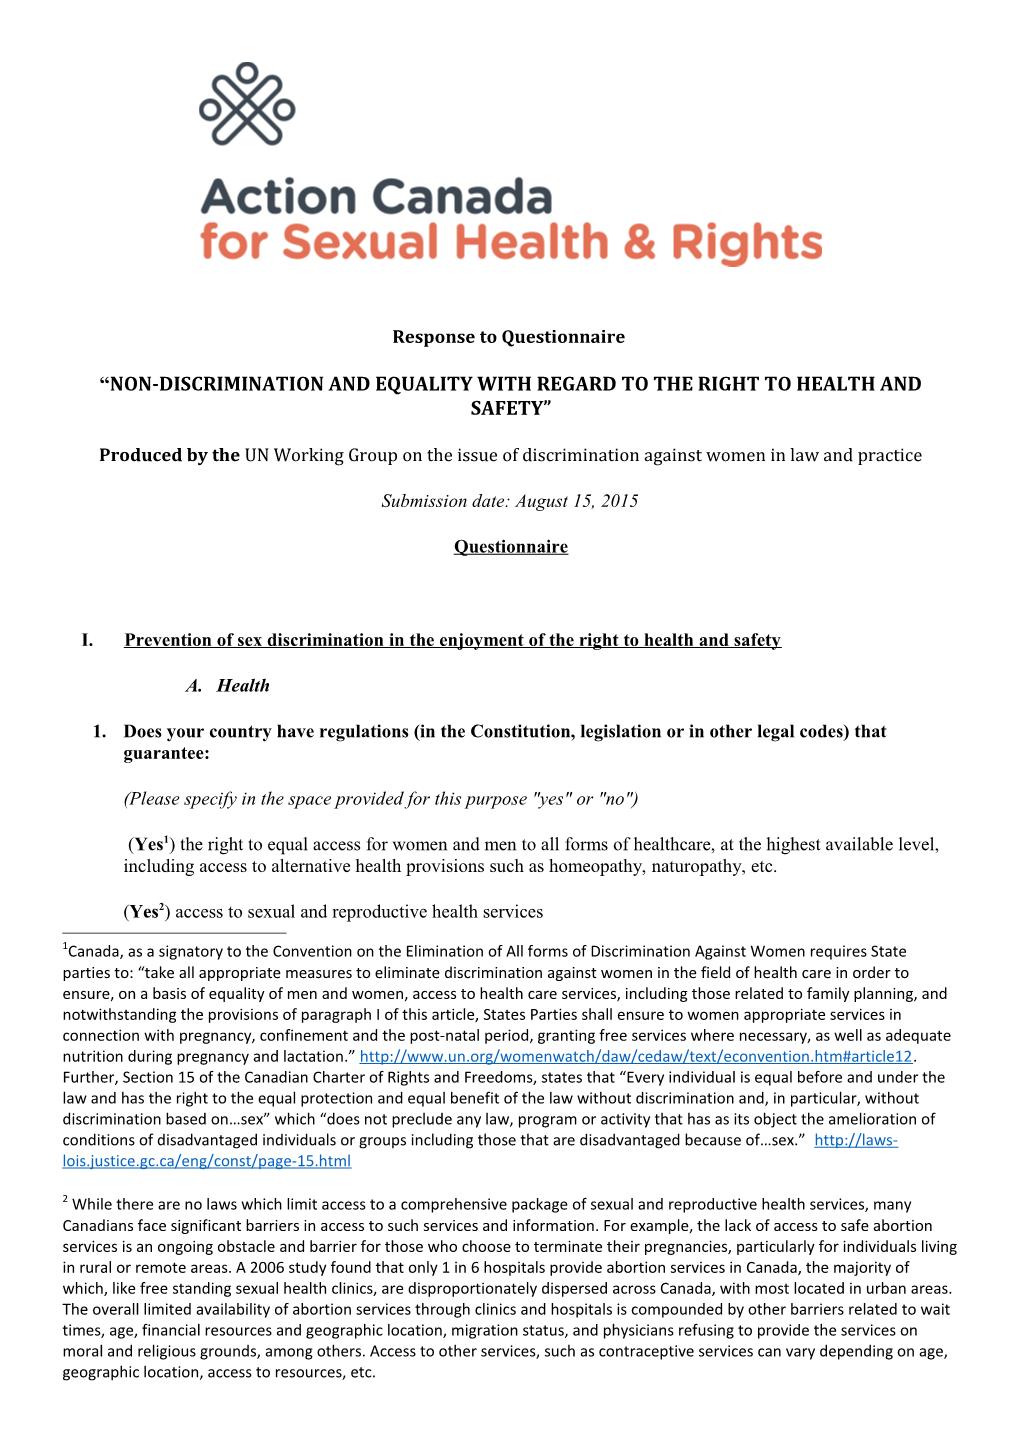 Non-Discrimination and Equality with Regard to the Right to Health and Safety